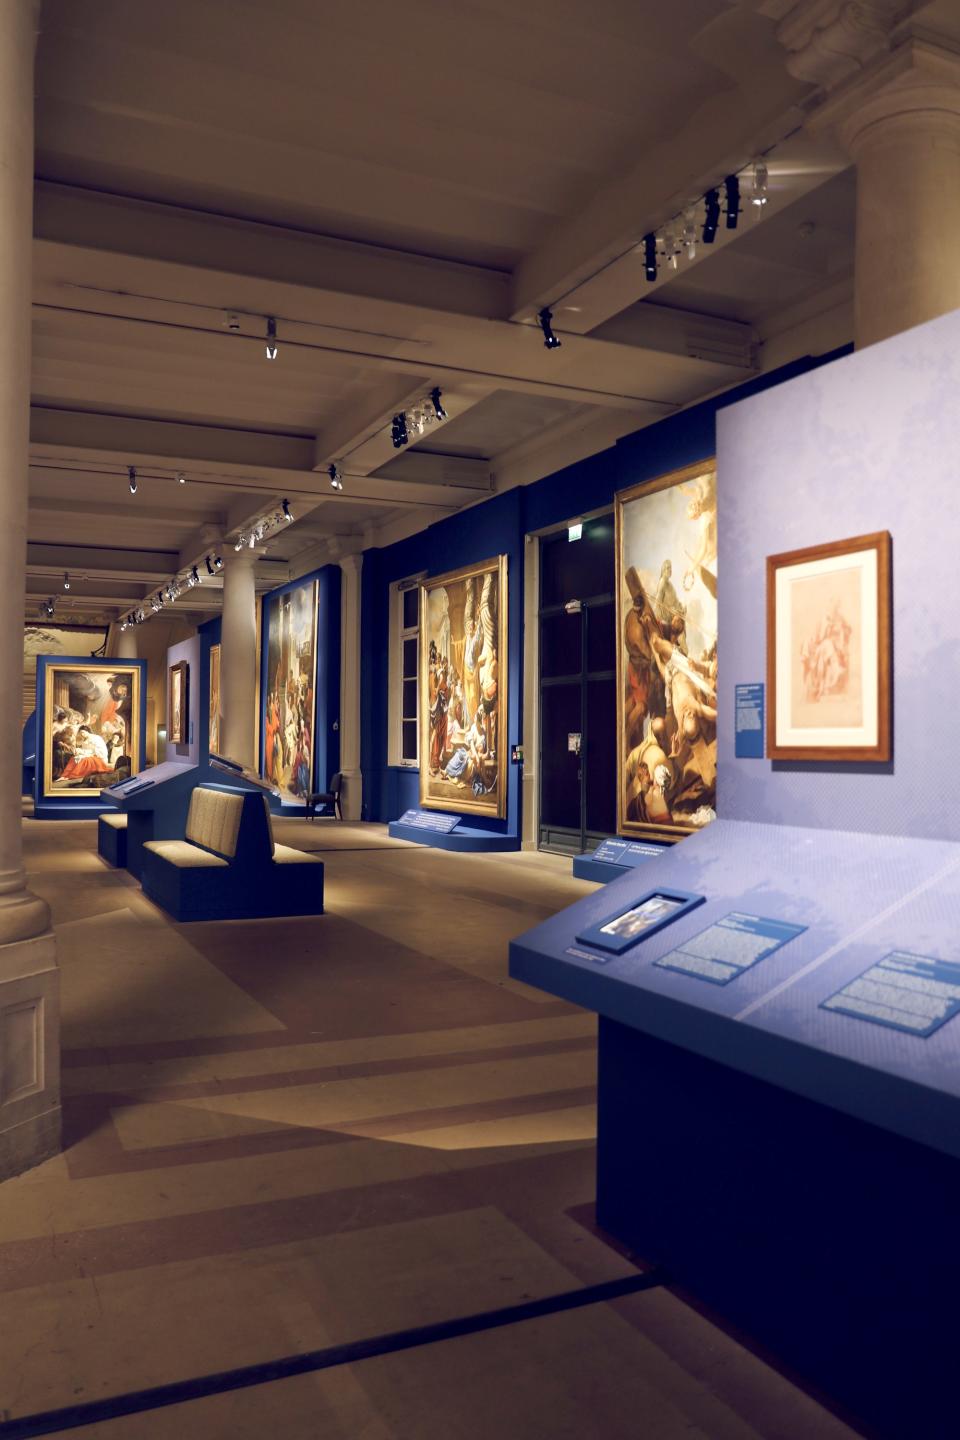 The exhibit Restoring the Grands Decors of Notre Dame juxtaposes restored pieces and contemporary art.